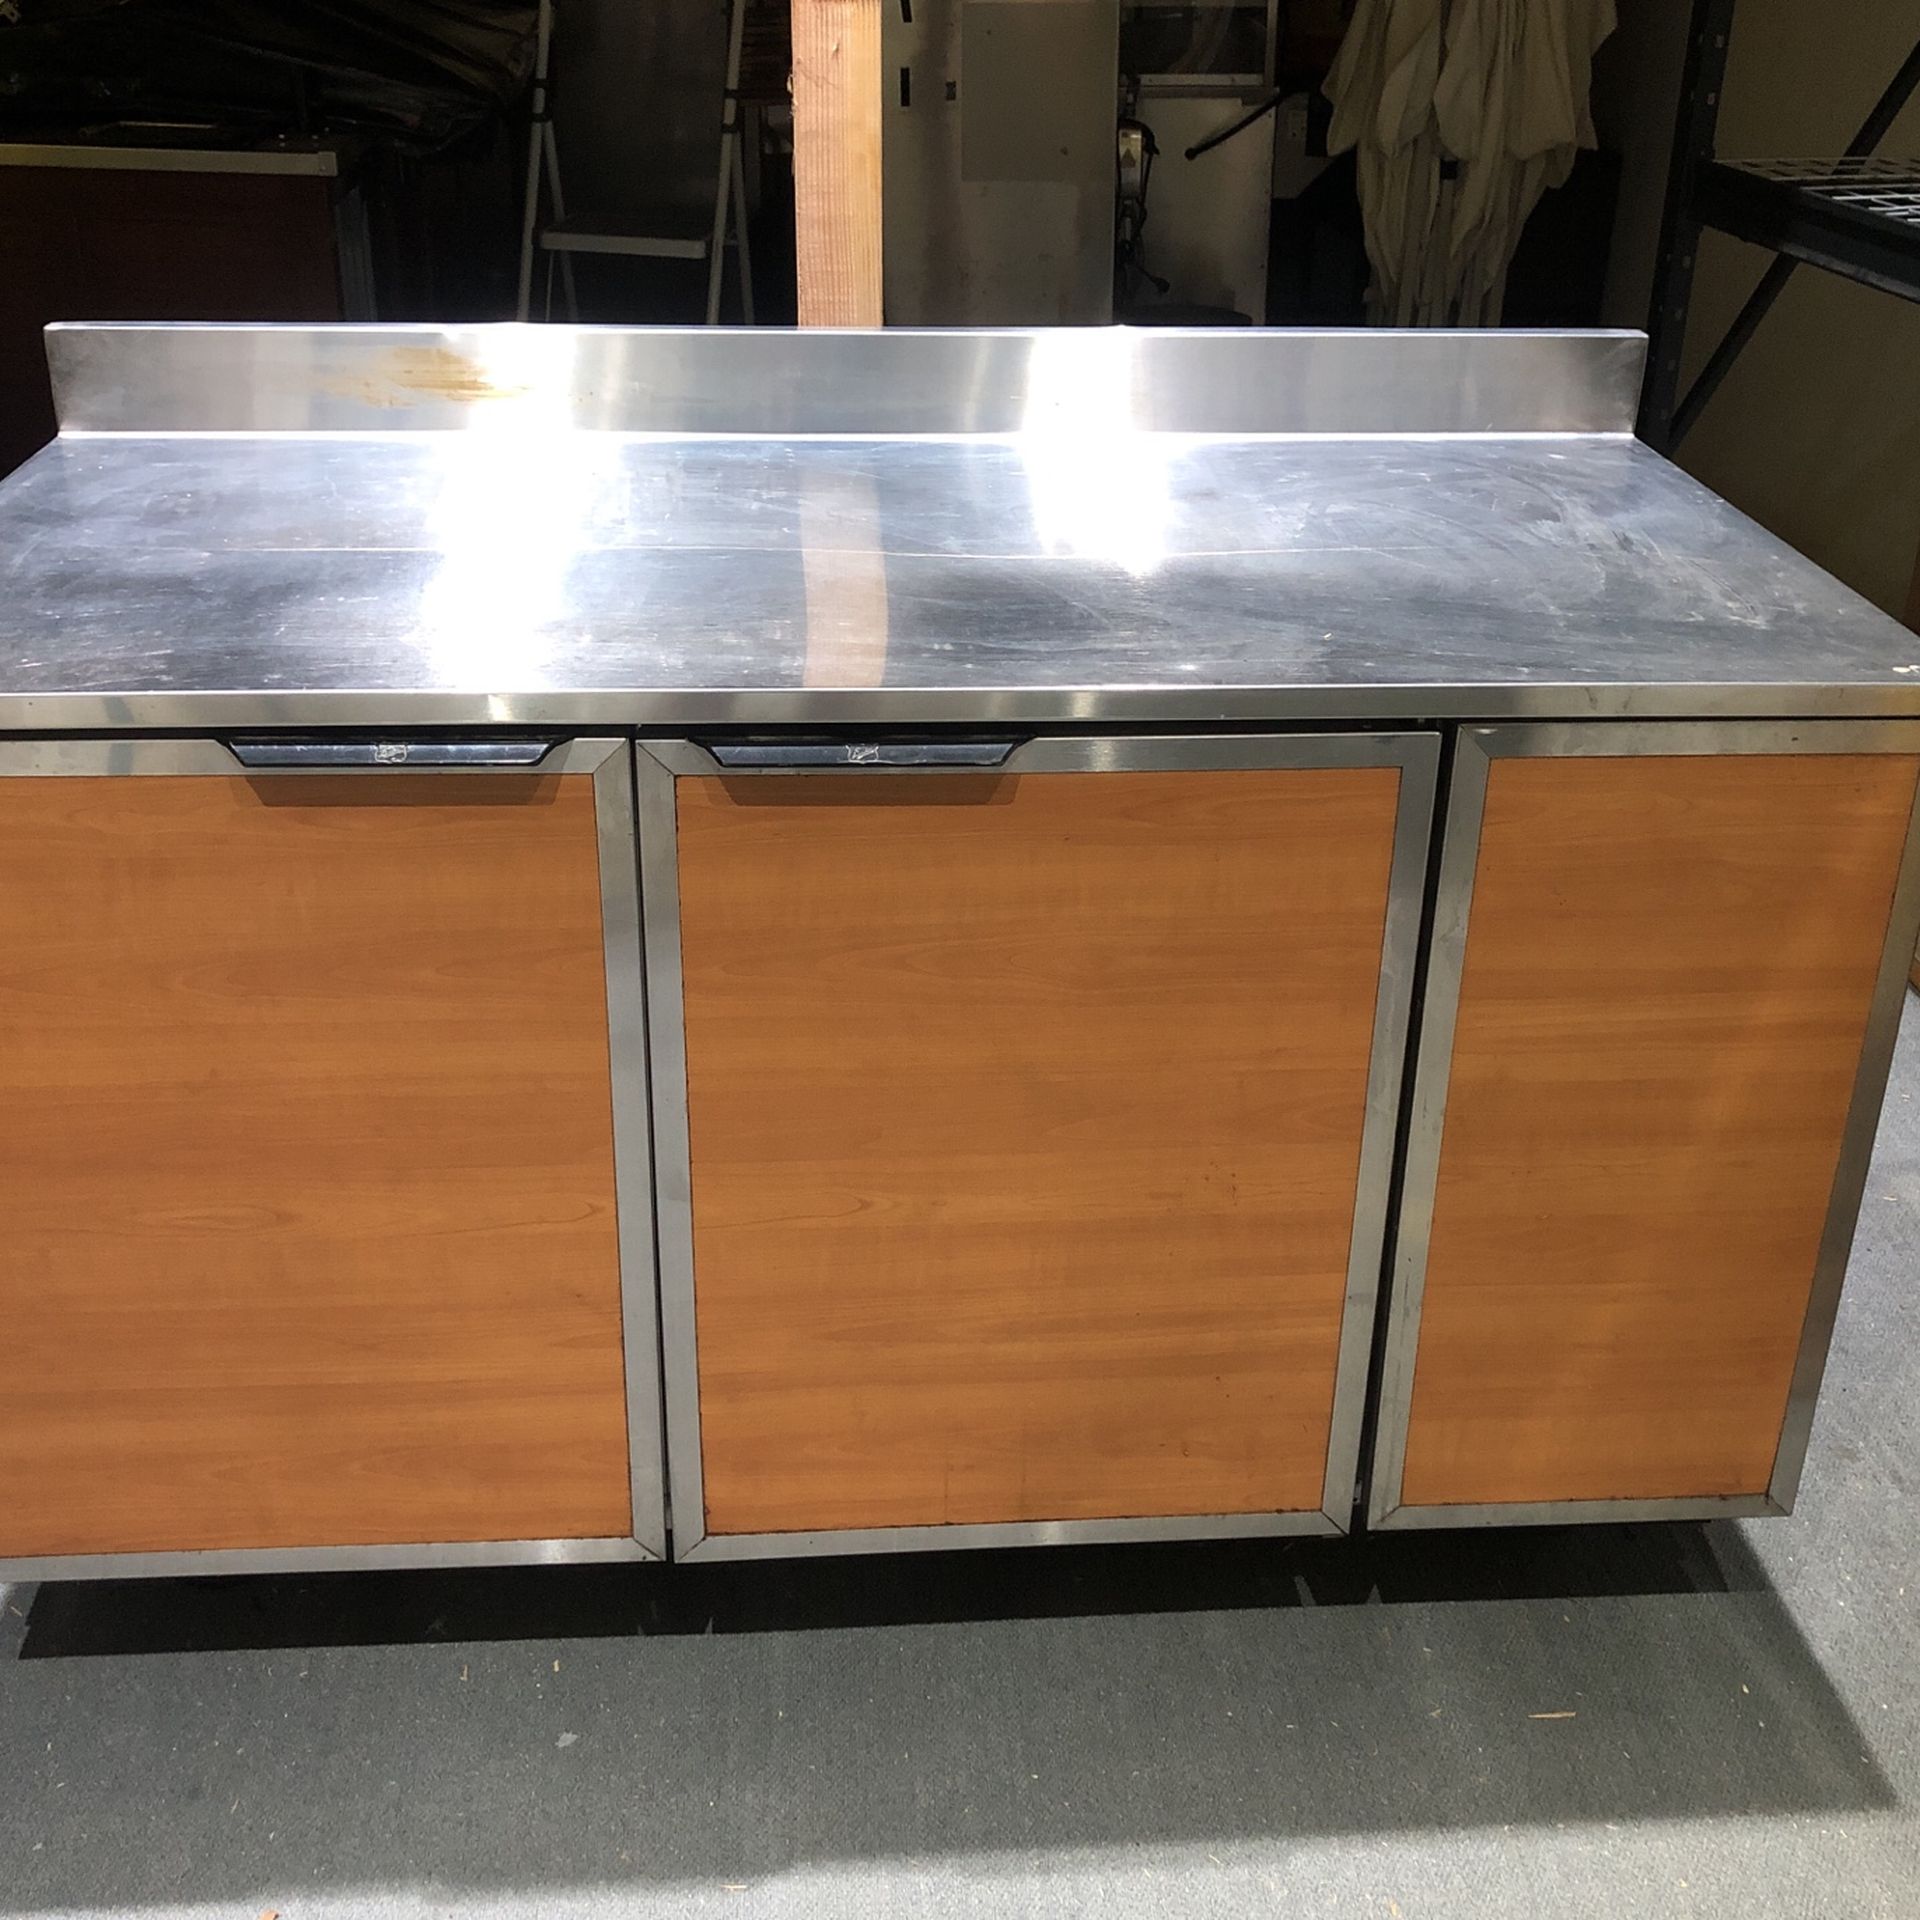 Refrigerator with Stainless Work Surface